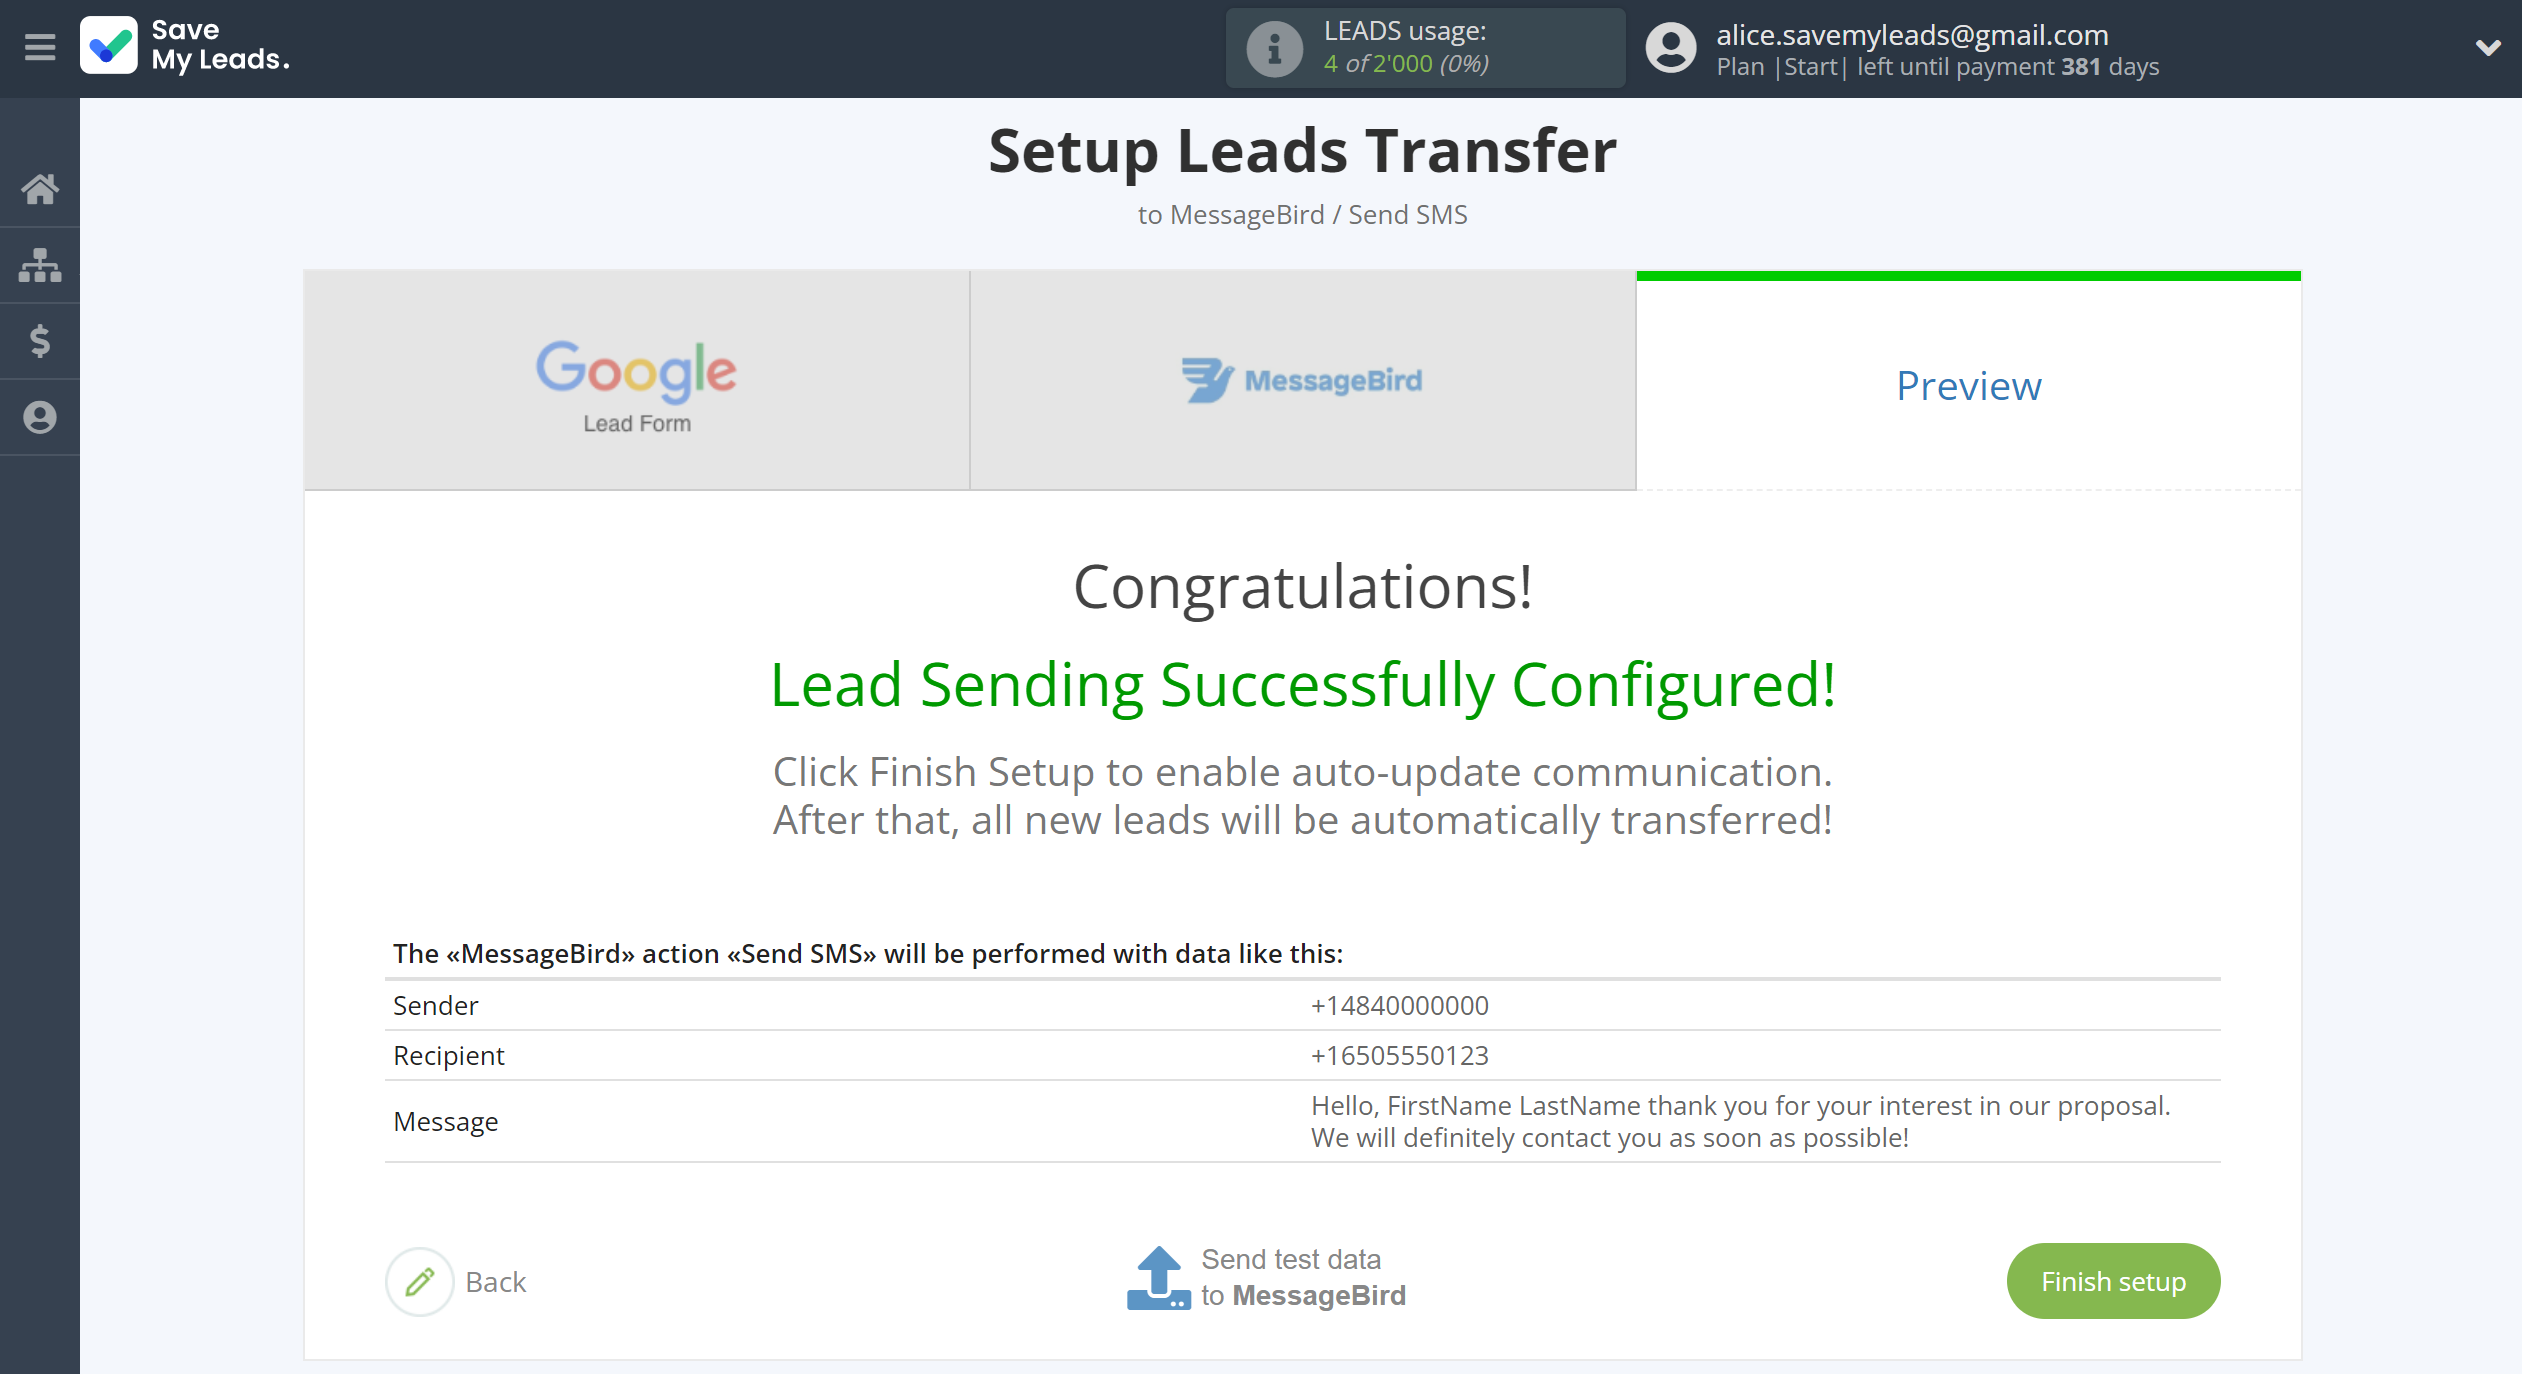 How to Connect Google Lead Form with MessageBird | Test data